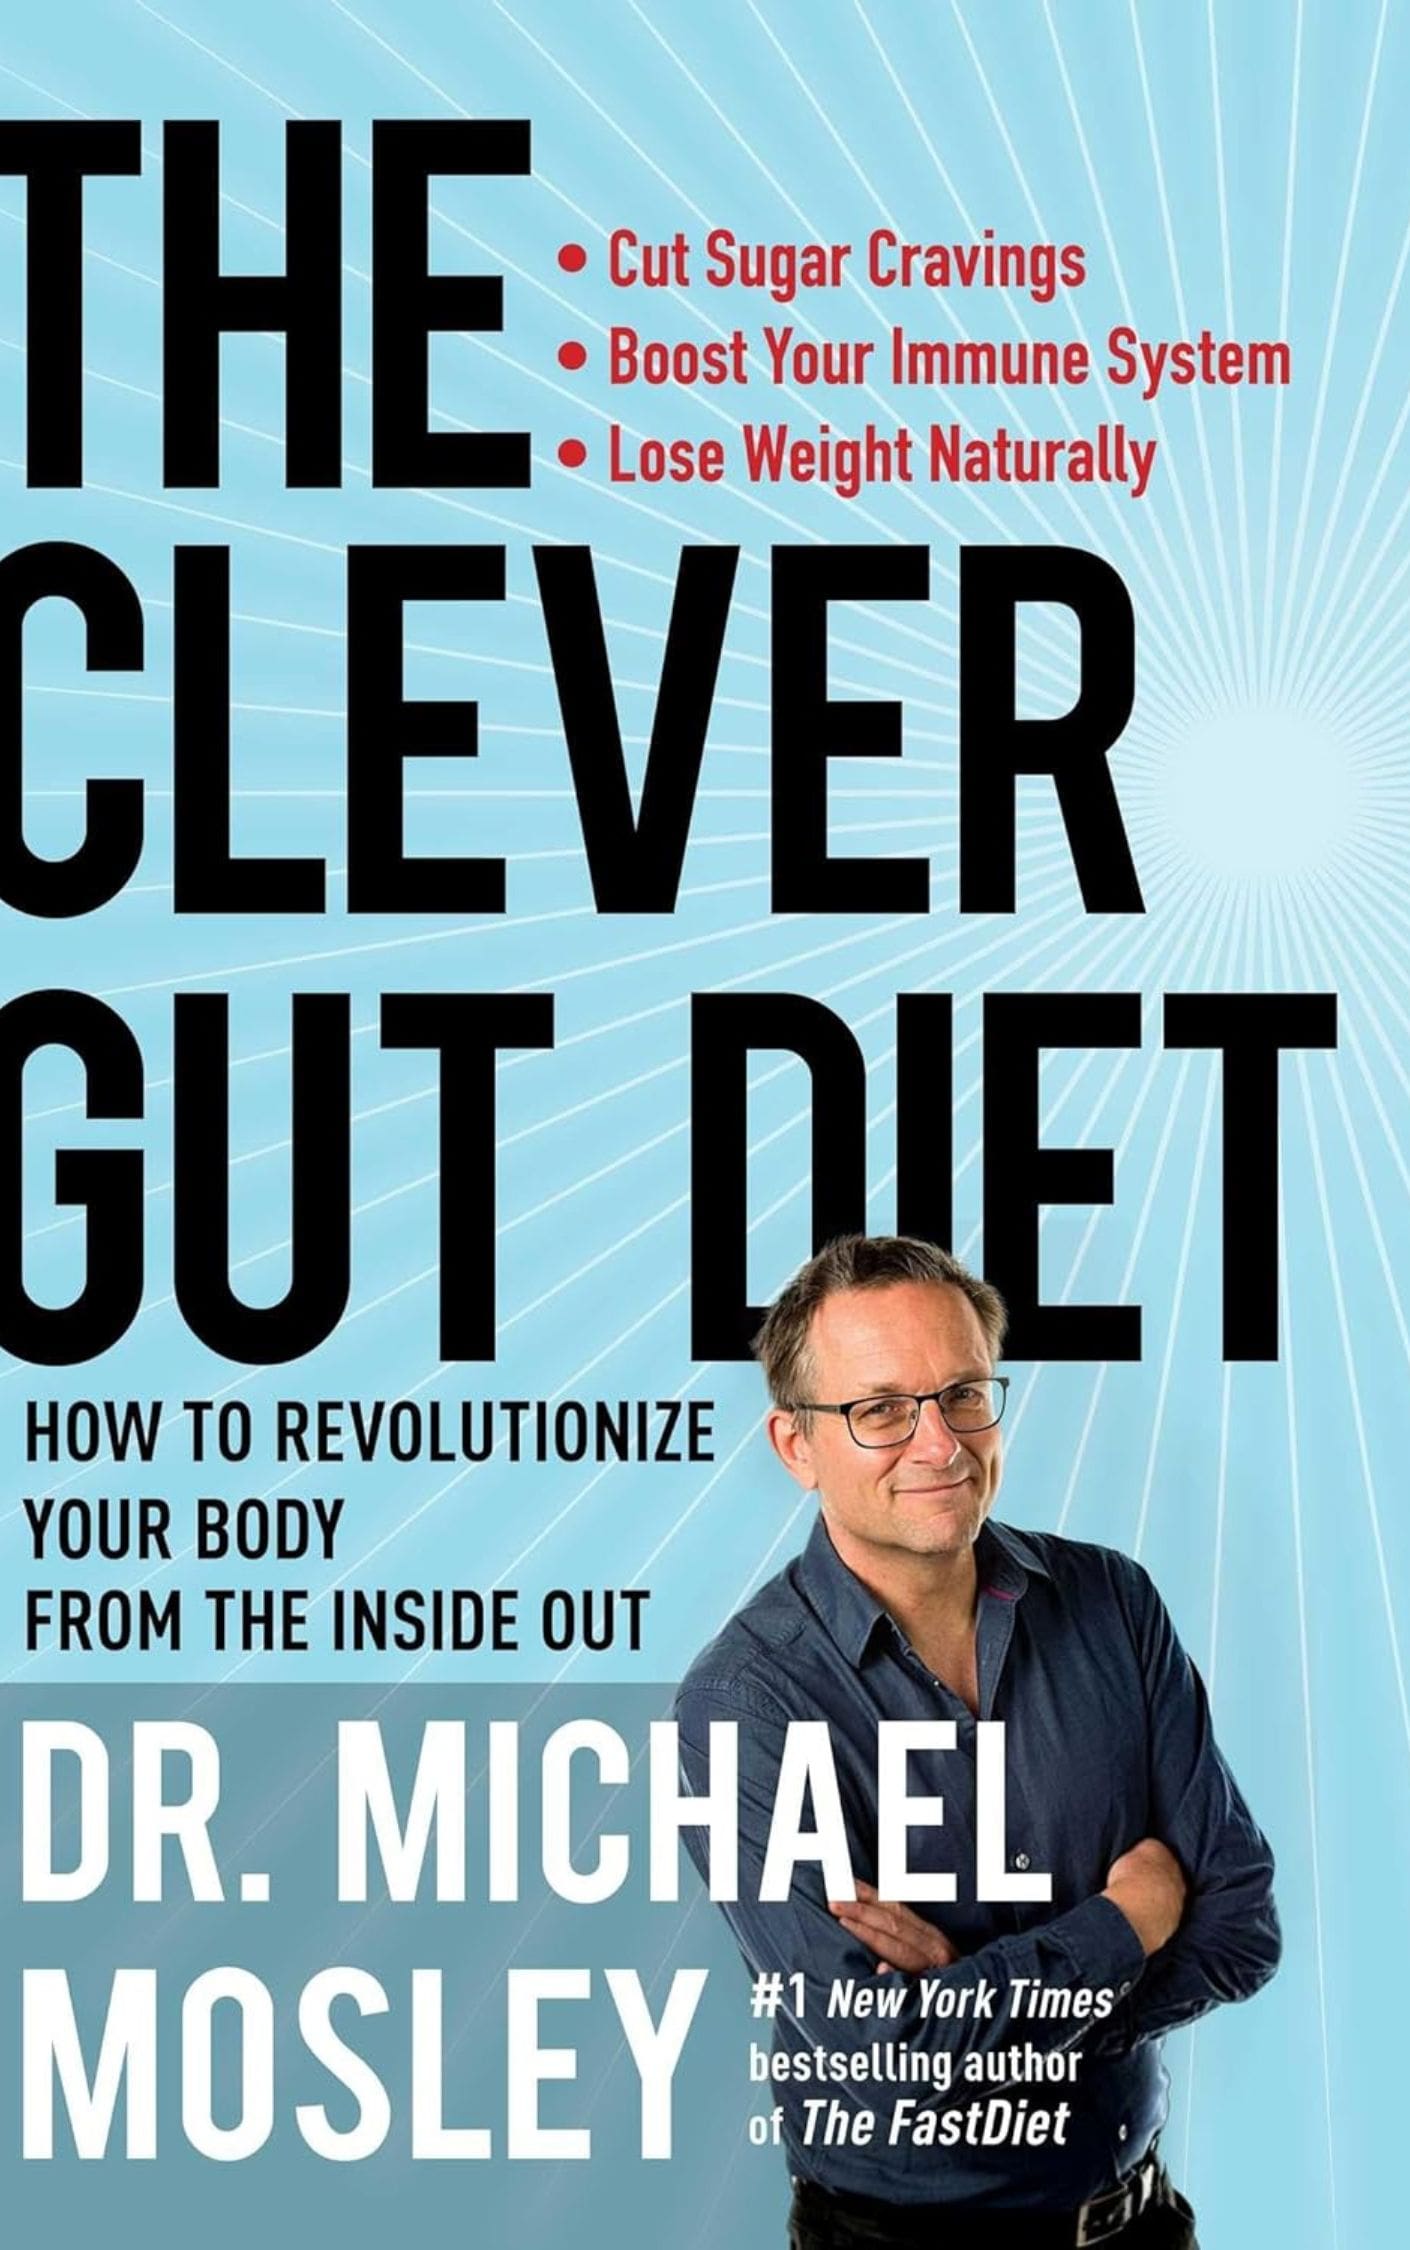 The Clever Gut Diet